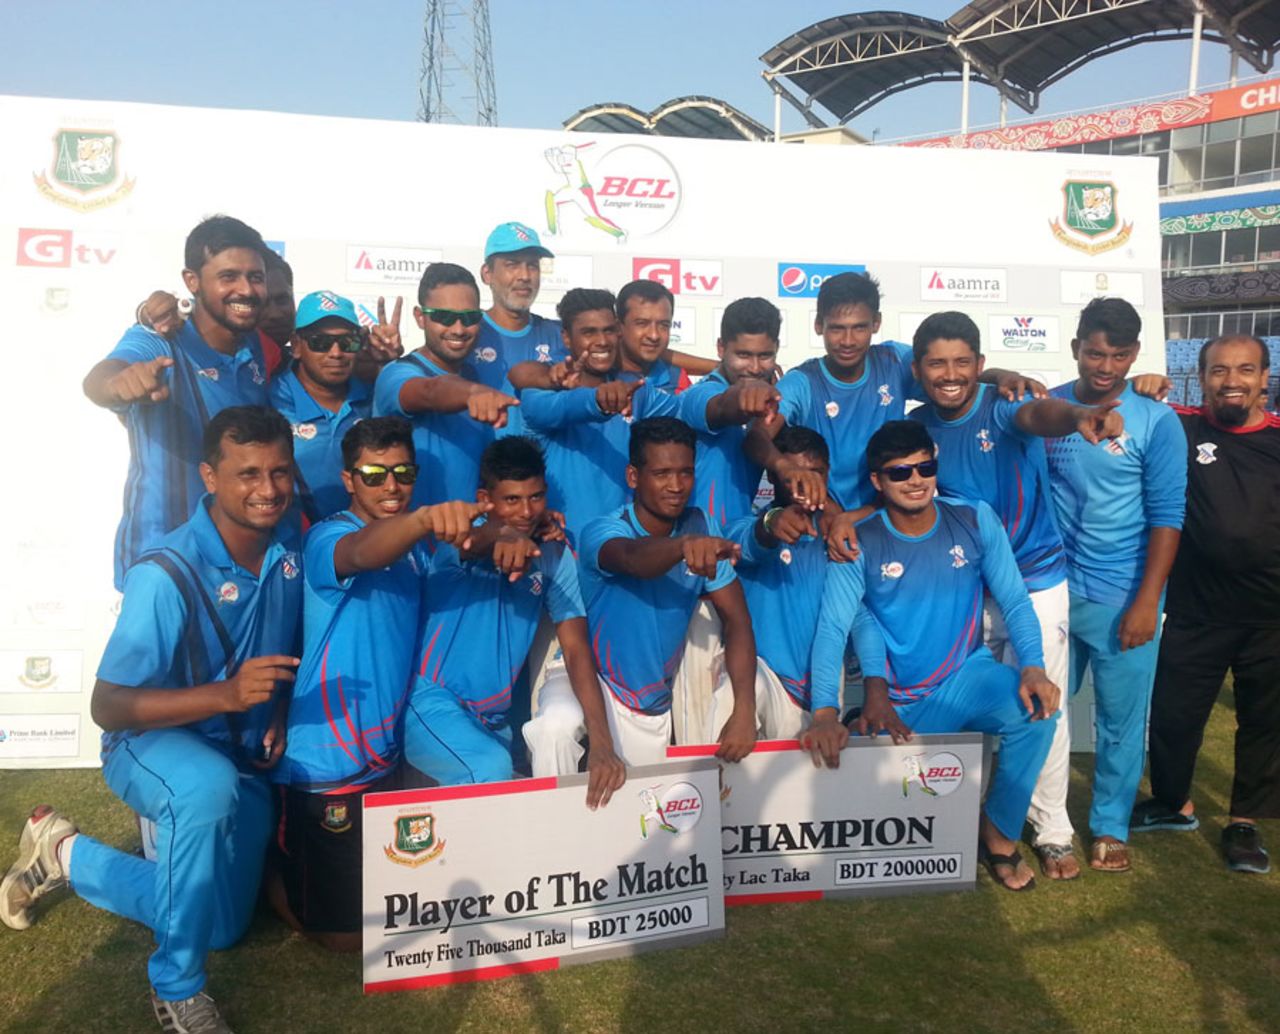 South Zone retained the BCL title after a draw against East Zone, South Zone v East Zone, Chittagong, Bangladesh Cricket League, May 27, 2015